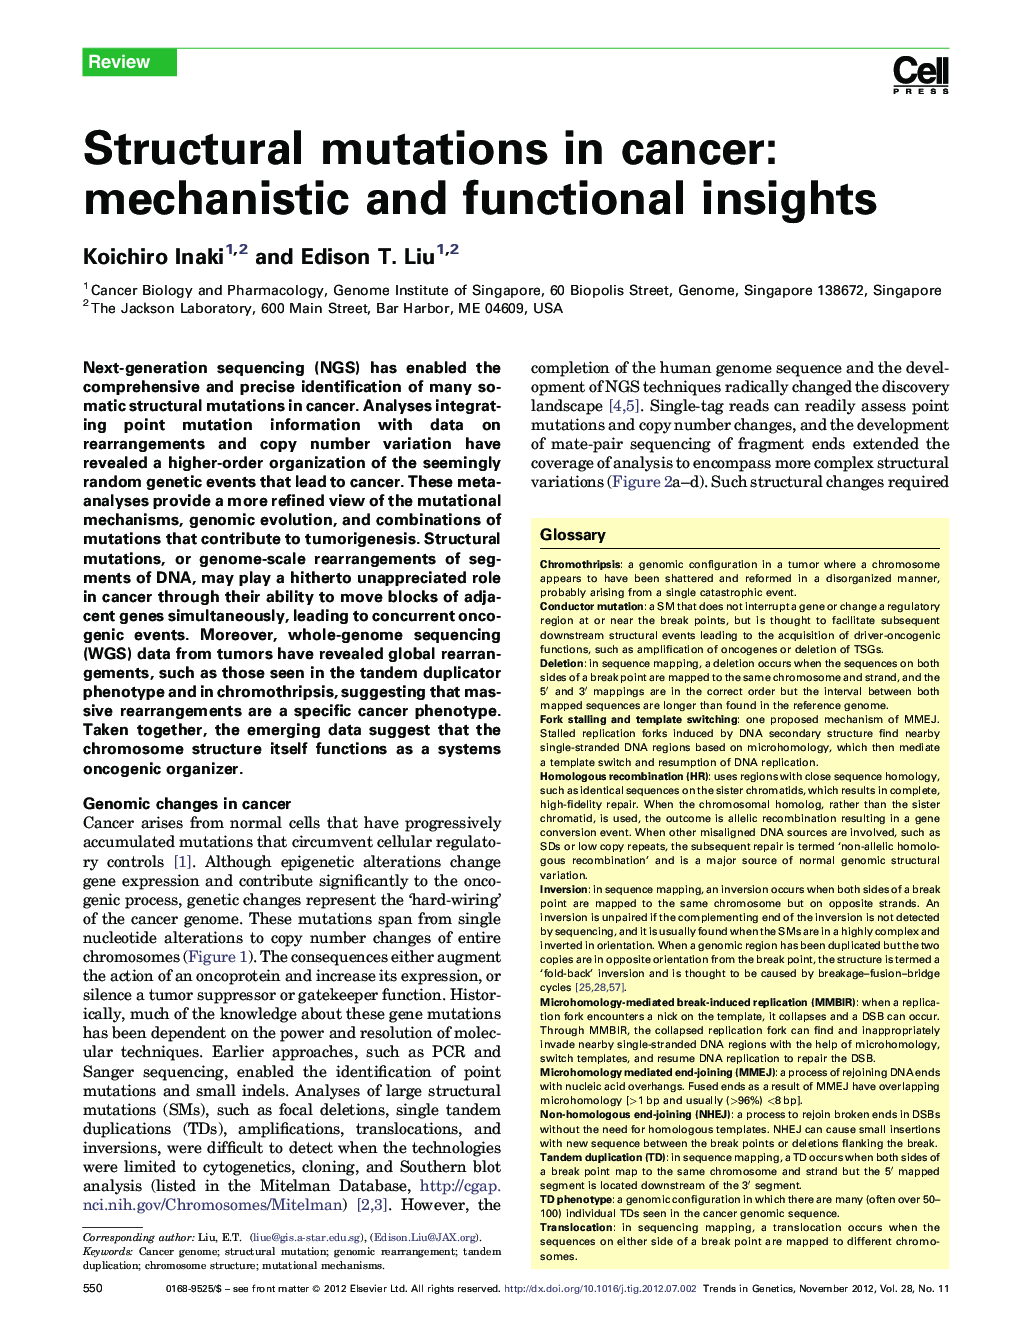 Structural mutations in cancer: mechanistic and functional insights